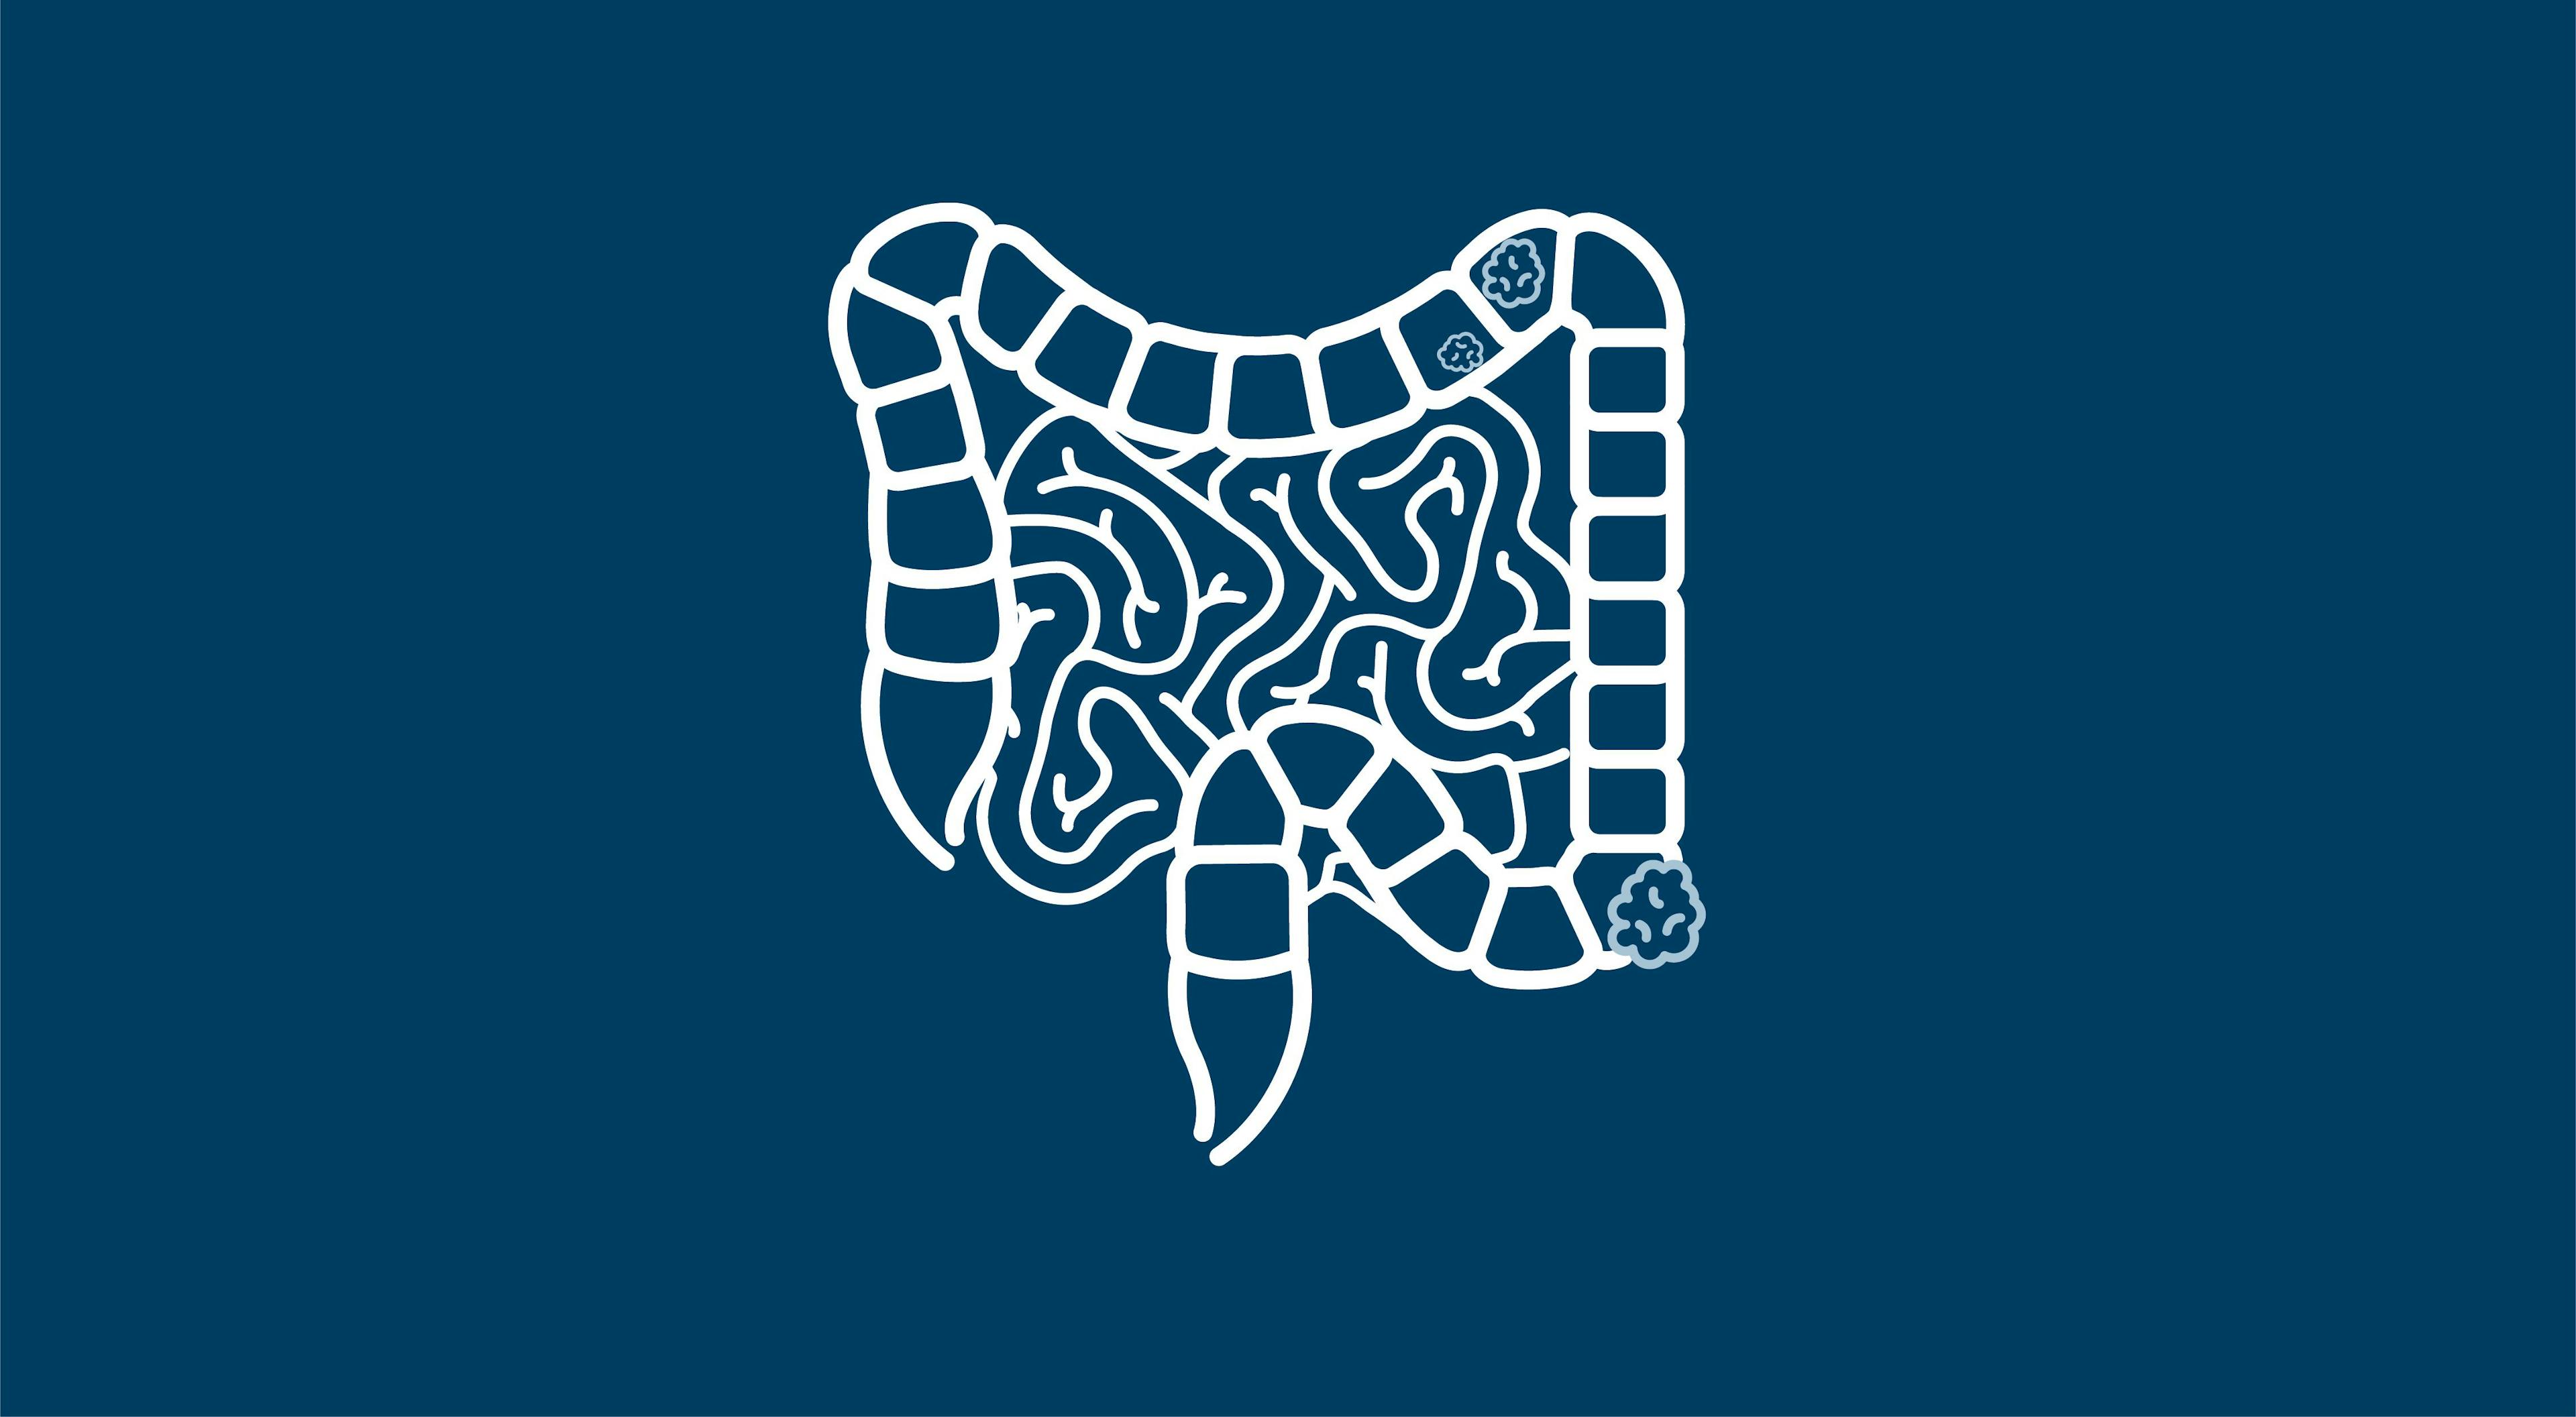 Most Older Patients Report Functional Recovery Following Colorectal Cancer Surgery